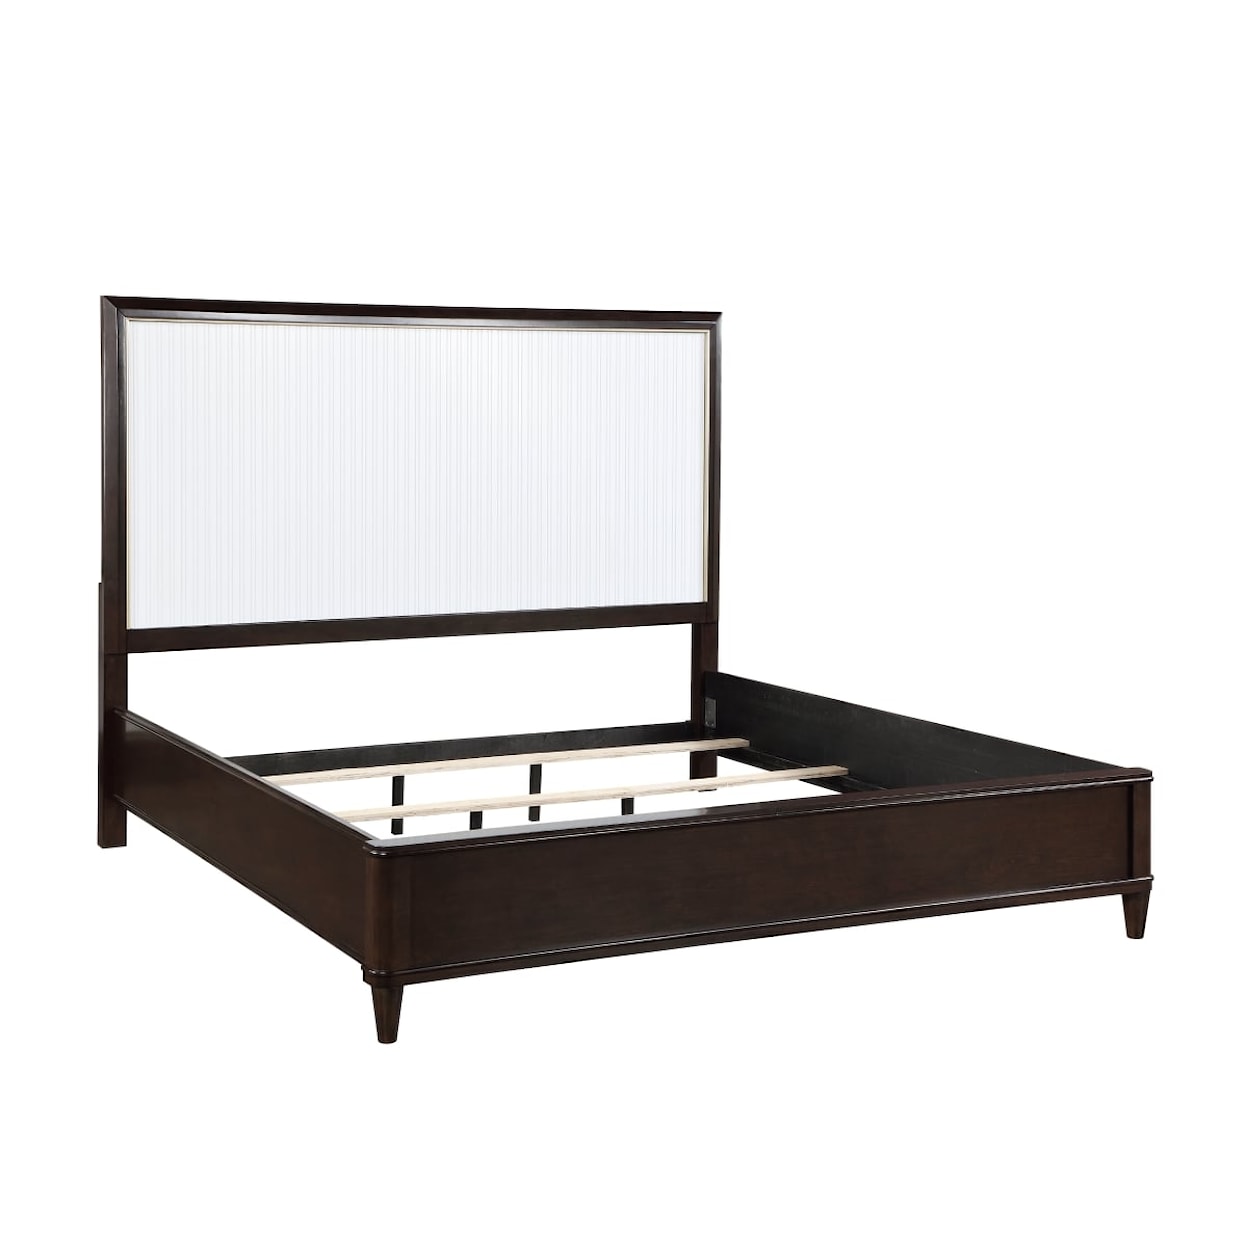 Homelegance Furniture Niles Queen Bed